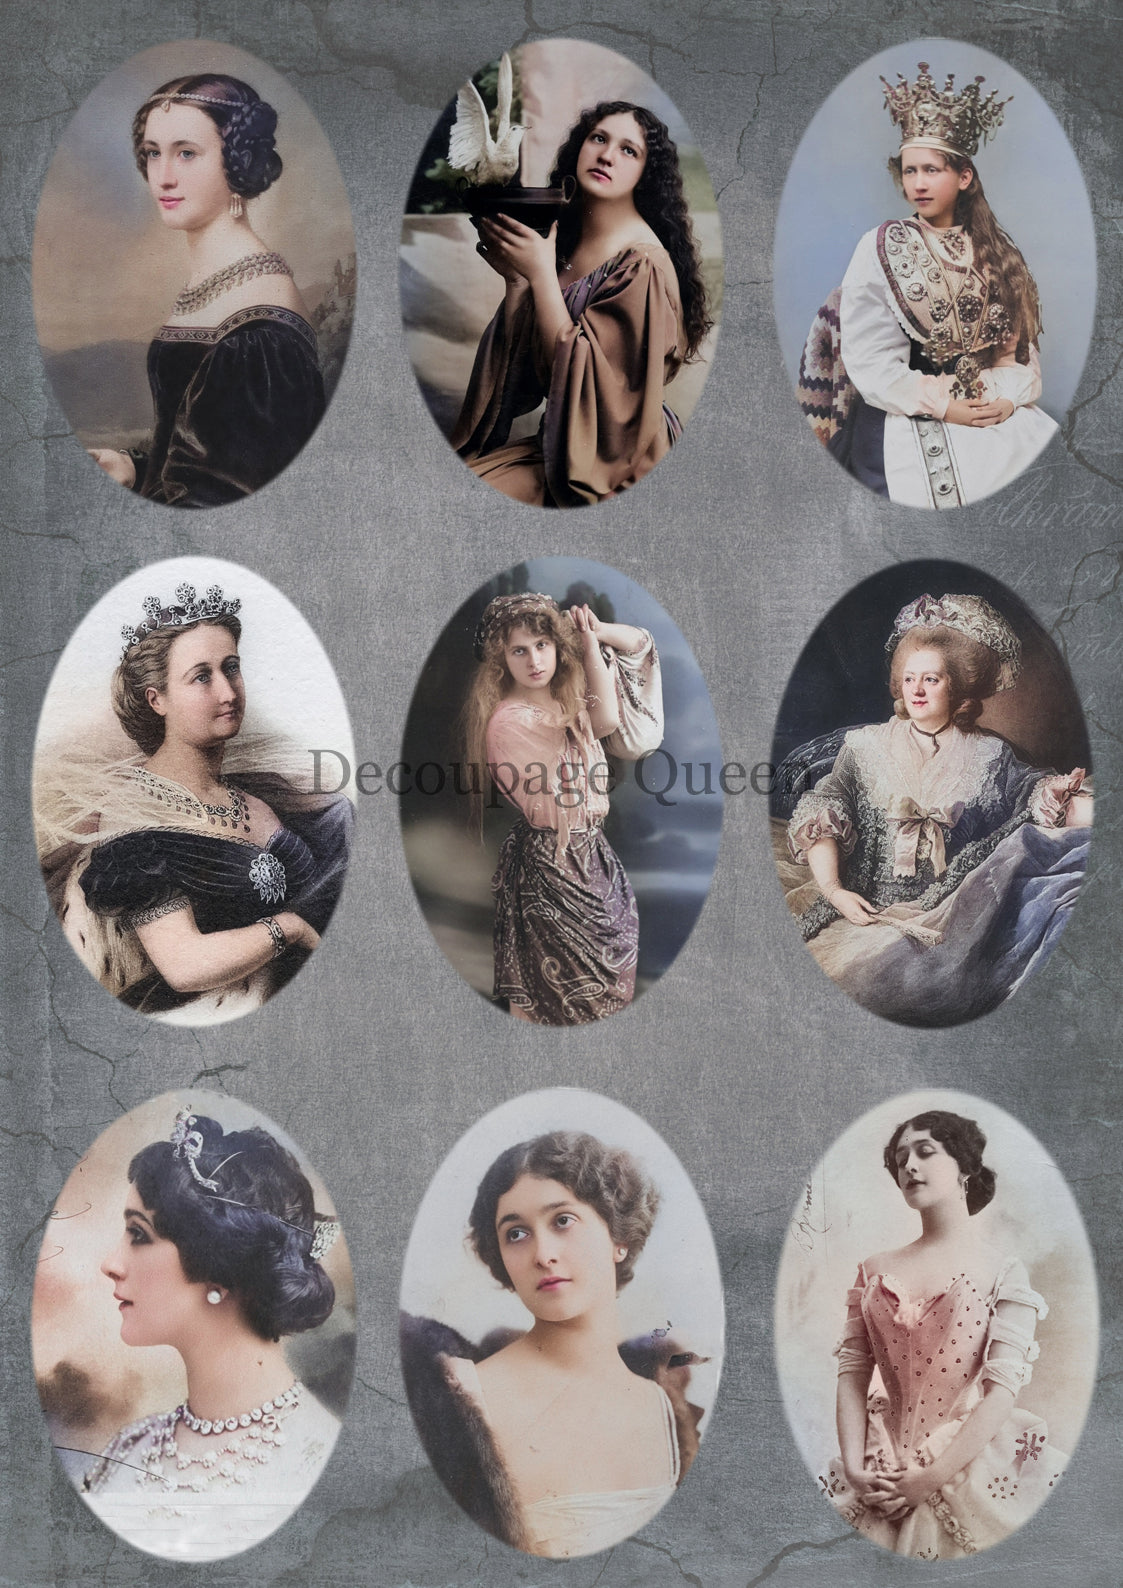 Decoupage Queen Vintage Ladies Oval Portraits Rice Paper A4 (11.7X 8.3 INCHES)